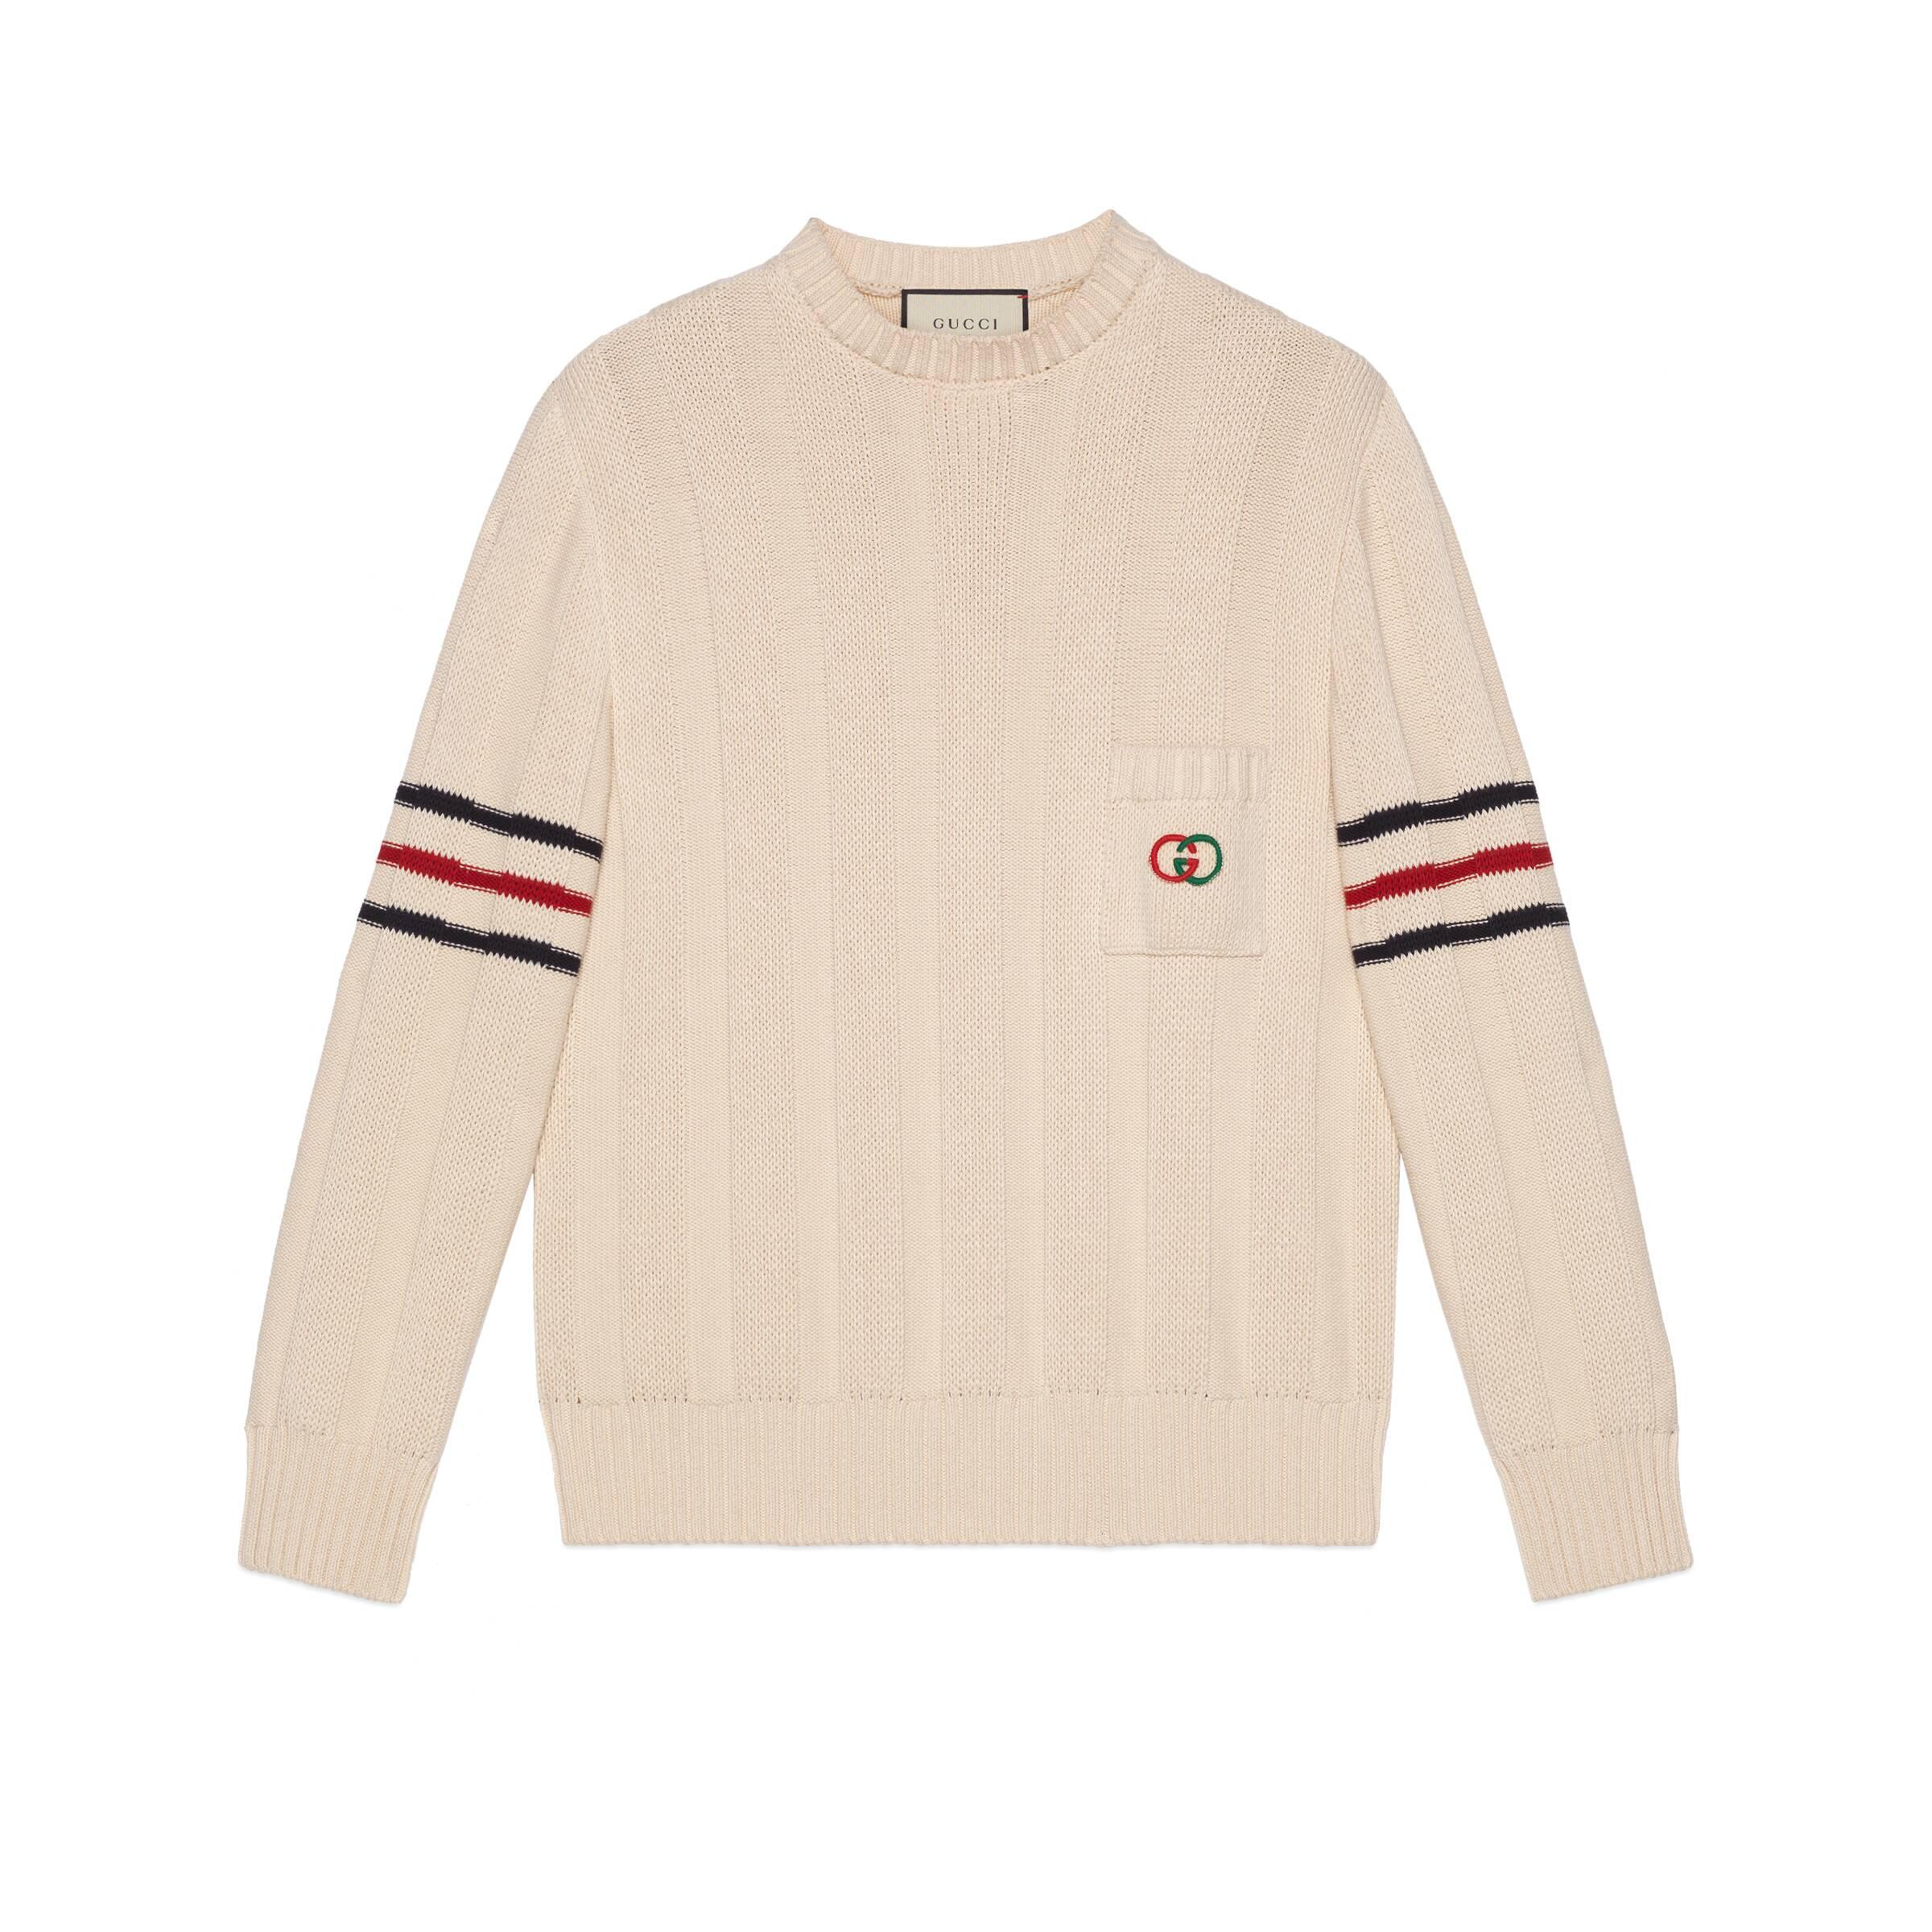 Gucci Knit Cotton Jumper With Interlocking G in White for Men - Lyst